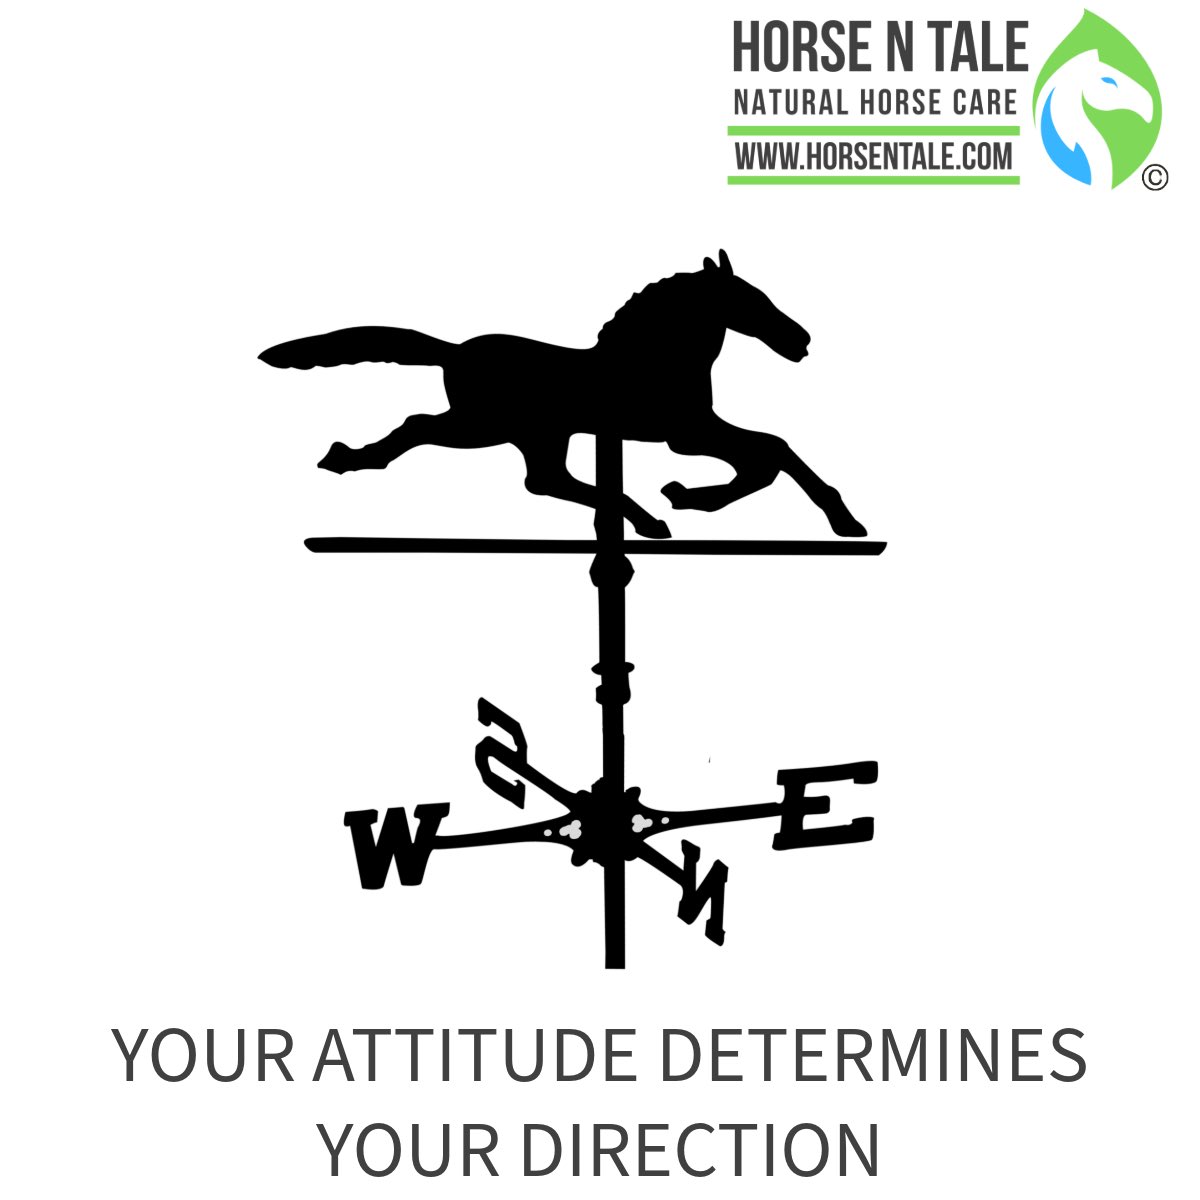 Monday Motivation.

YOUR ATTITUDE DETERMINES YOUR DIRECTION.

#horsentale #topicalequineproducts #naturalhorsecare #equine #horse #naturalingredients 
#teamhnt #teamhorsentale 
#motivationmonday #MondayMotivation #MondayMotivation #Monday #Mondaymindset